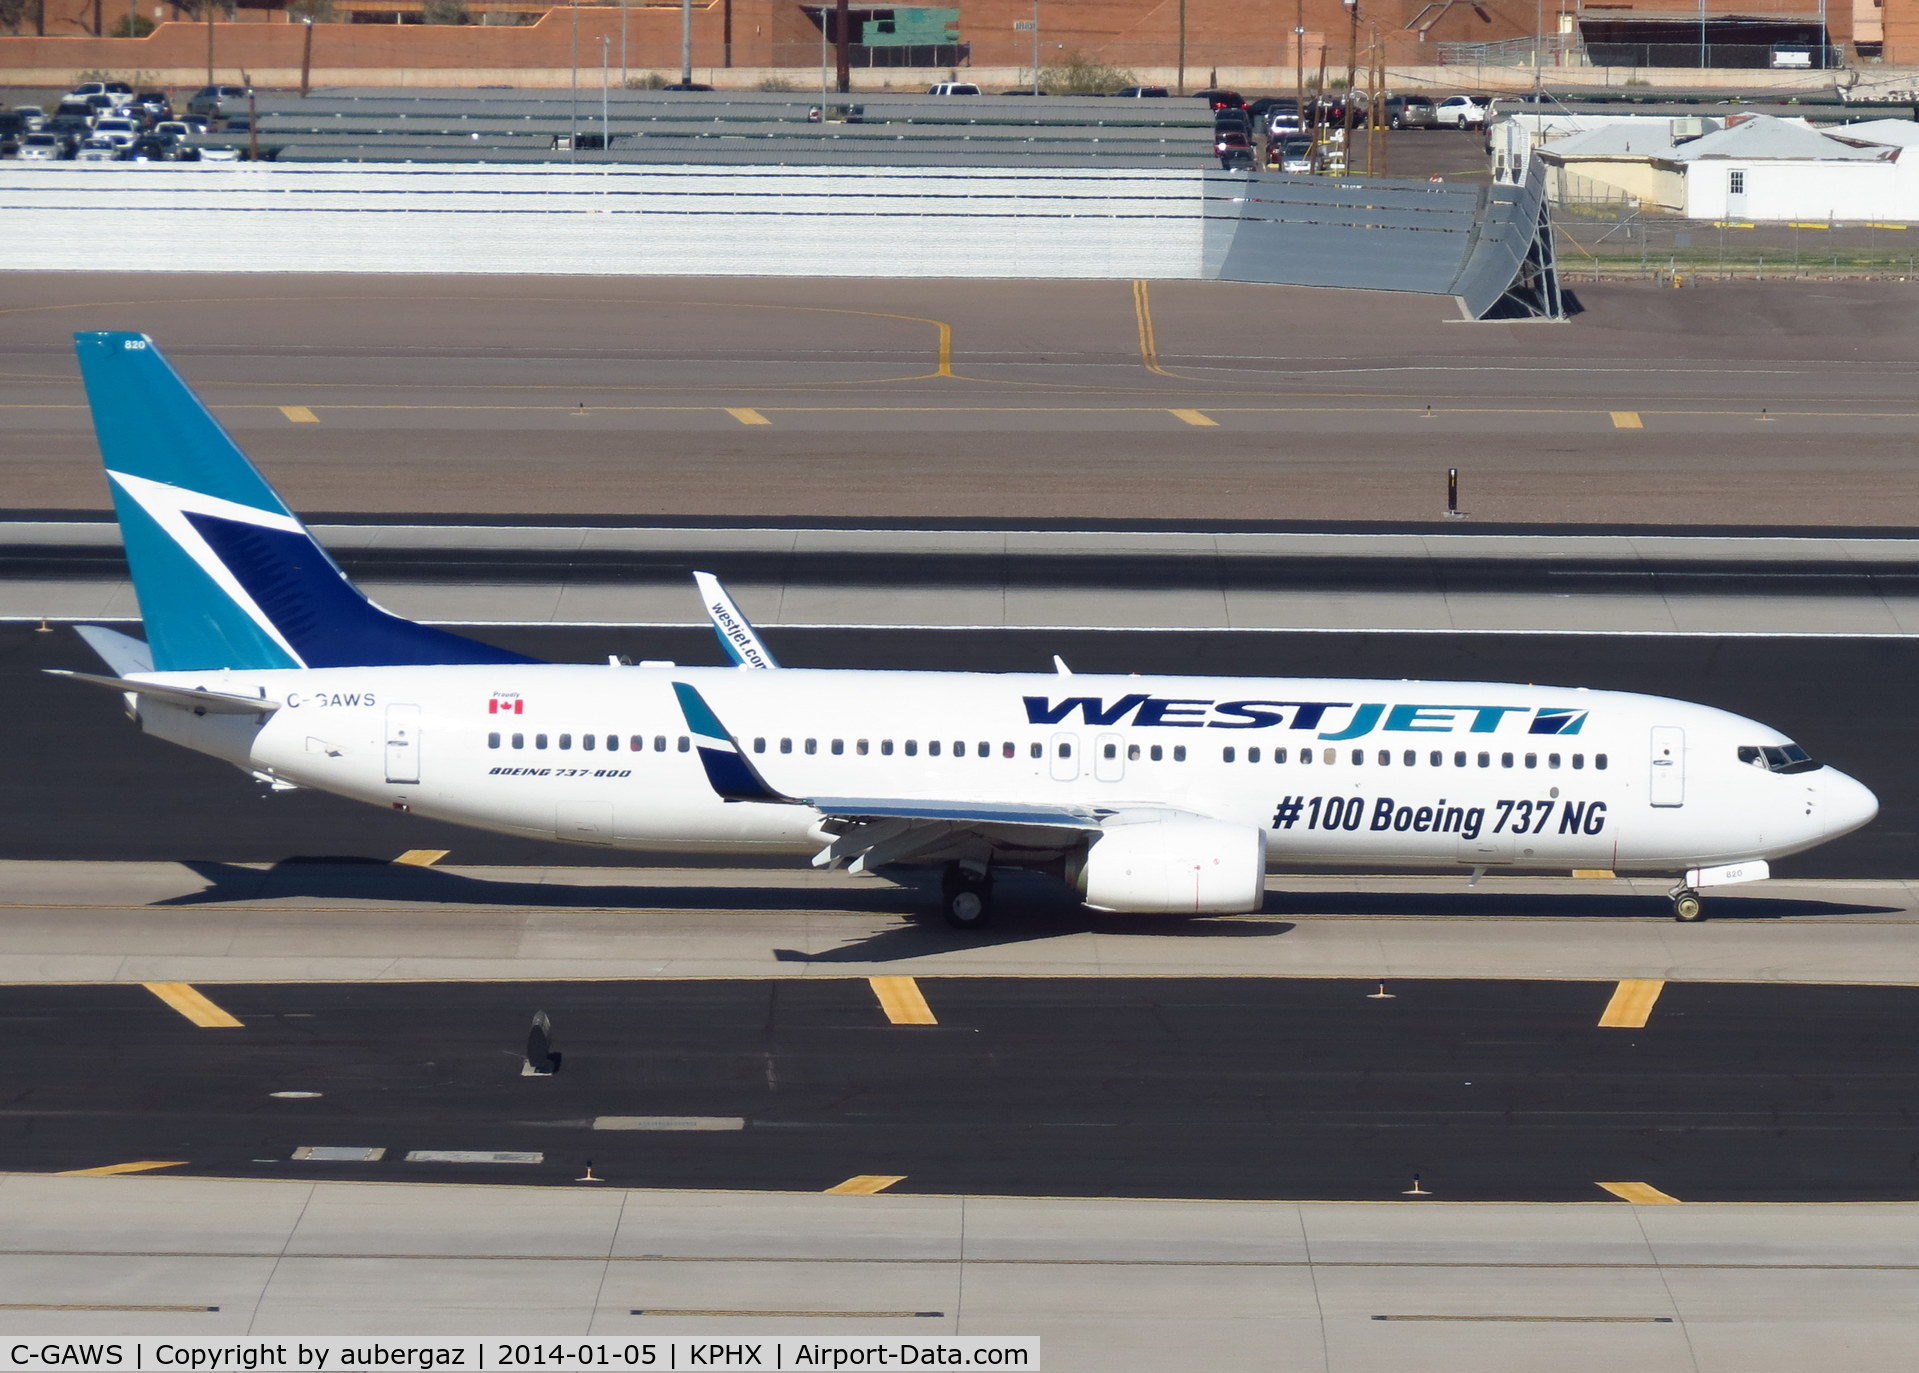 C-GAWS, 2012 Boeing 737-8CT C/N 38880, PHX Arrival